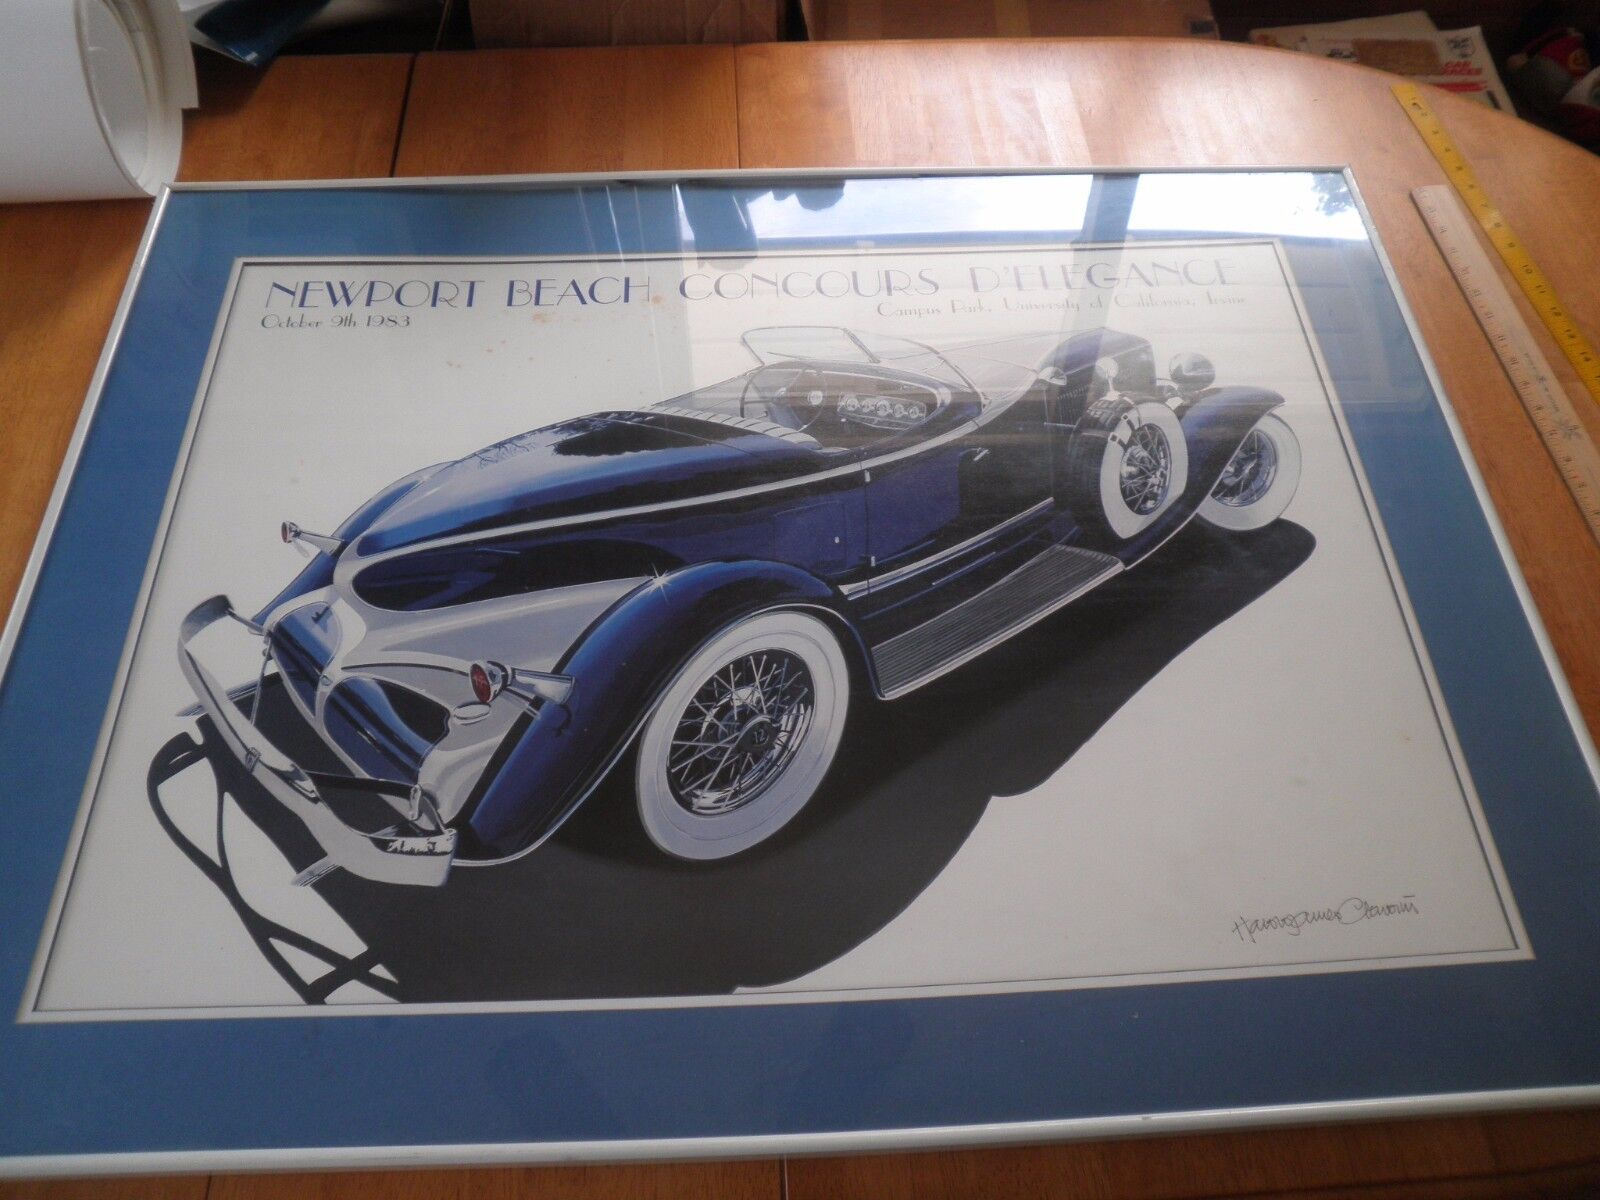 1983 Newport Beach Concours D'Elegance signed print signed Cleworth framed